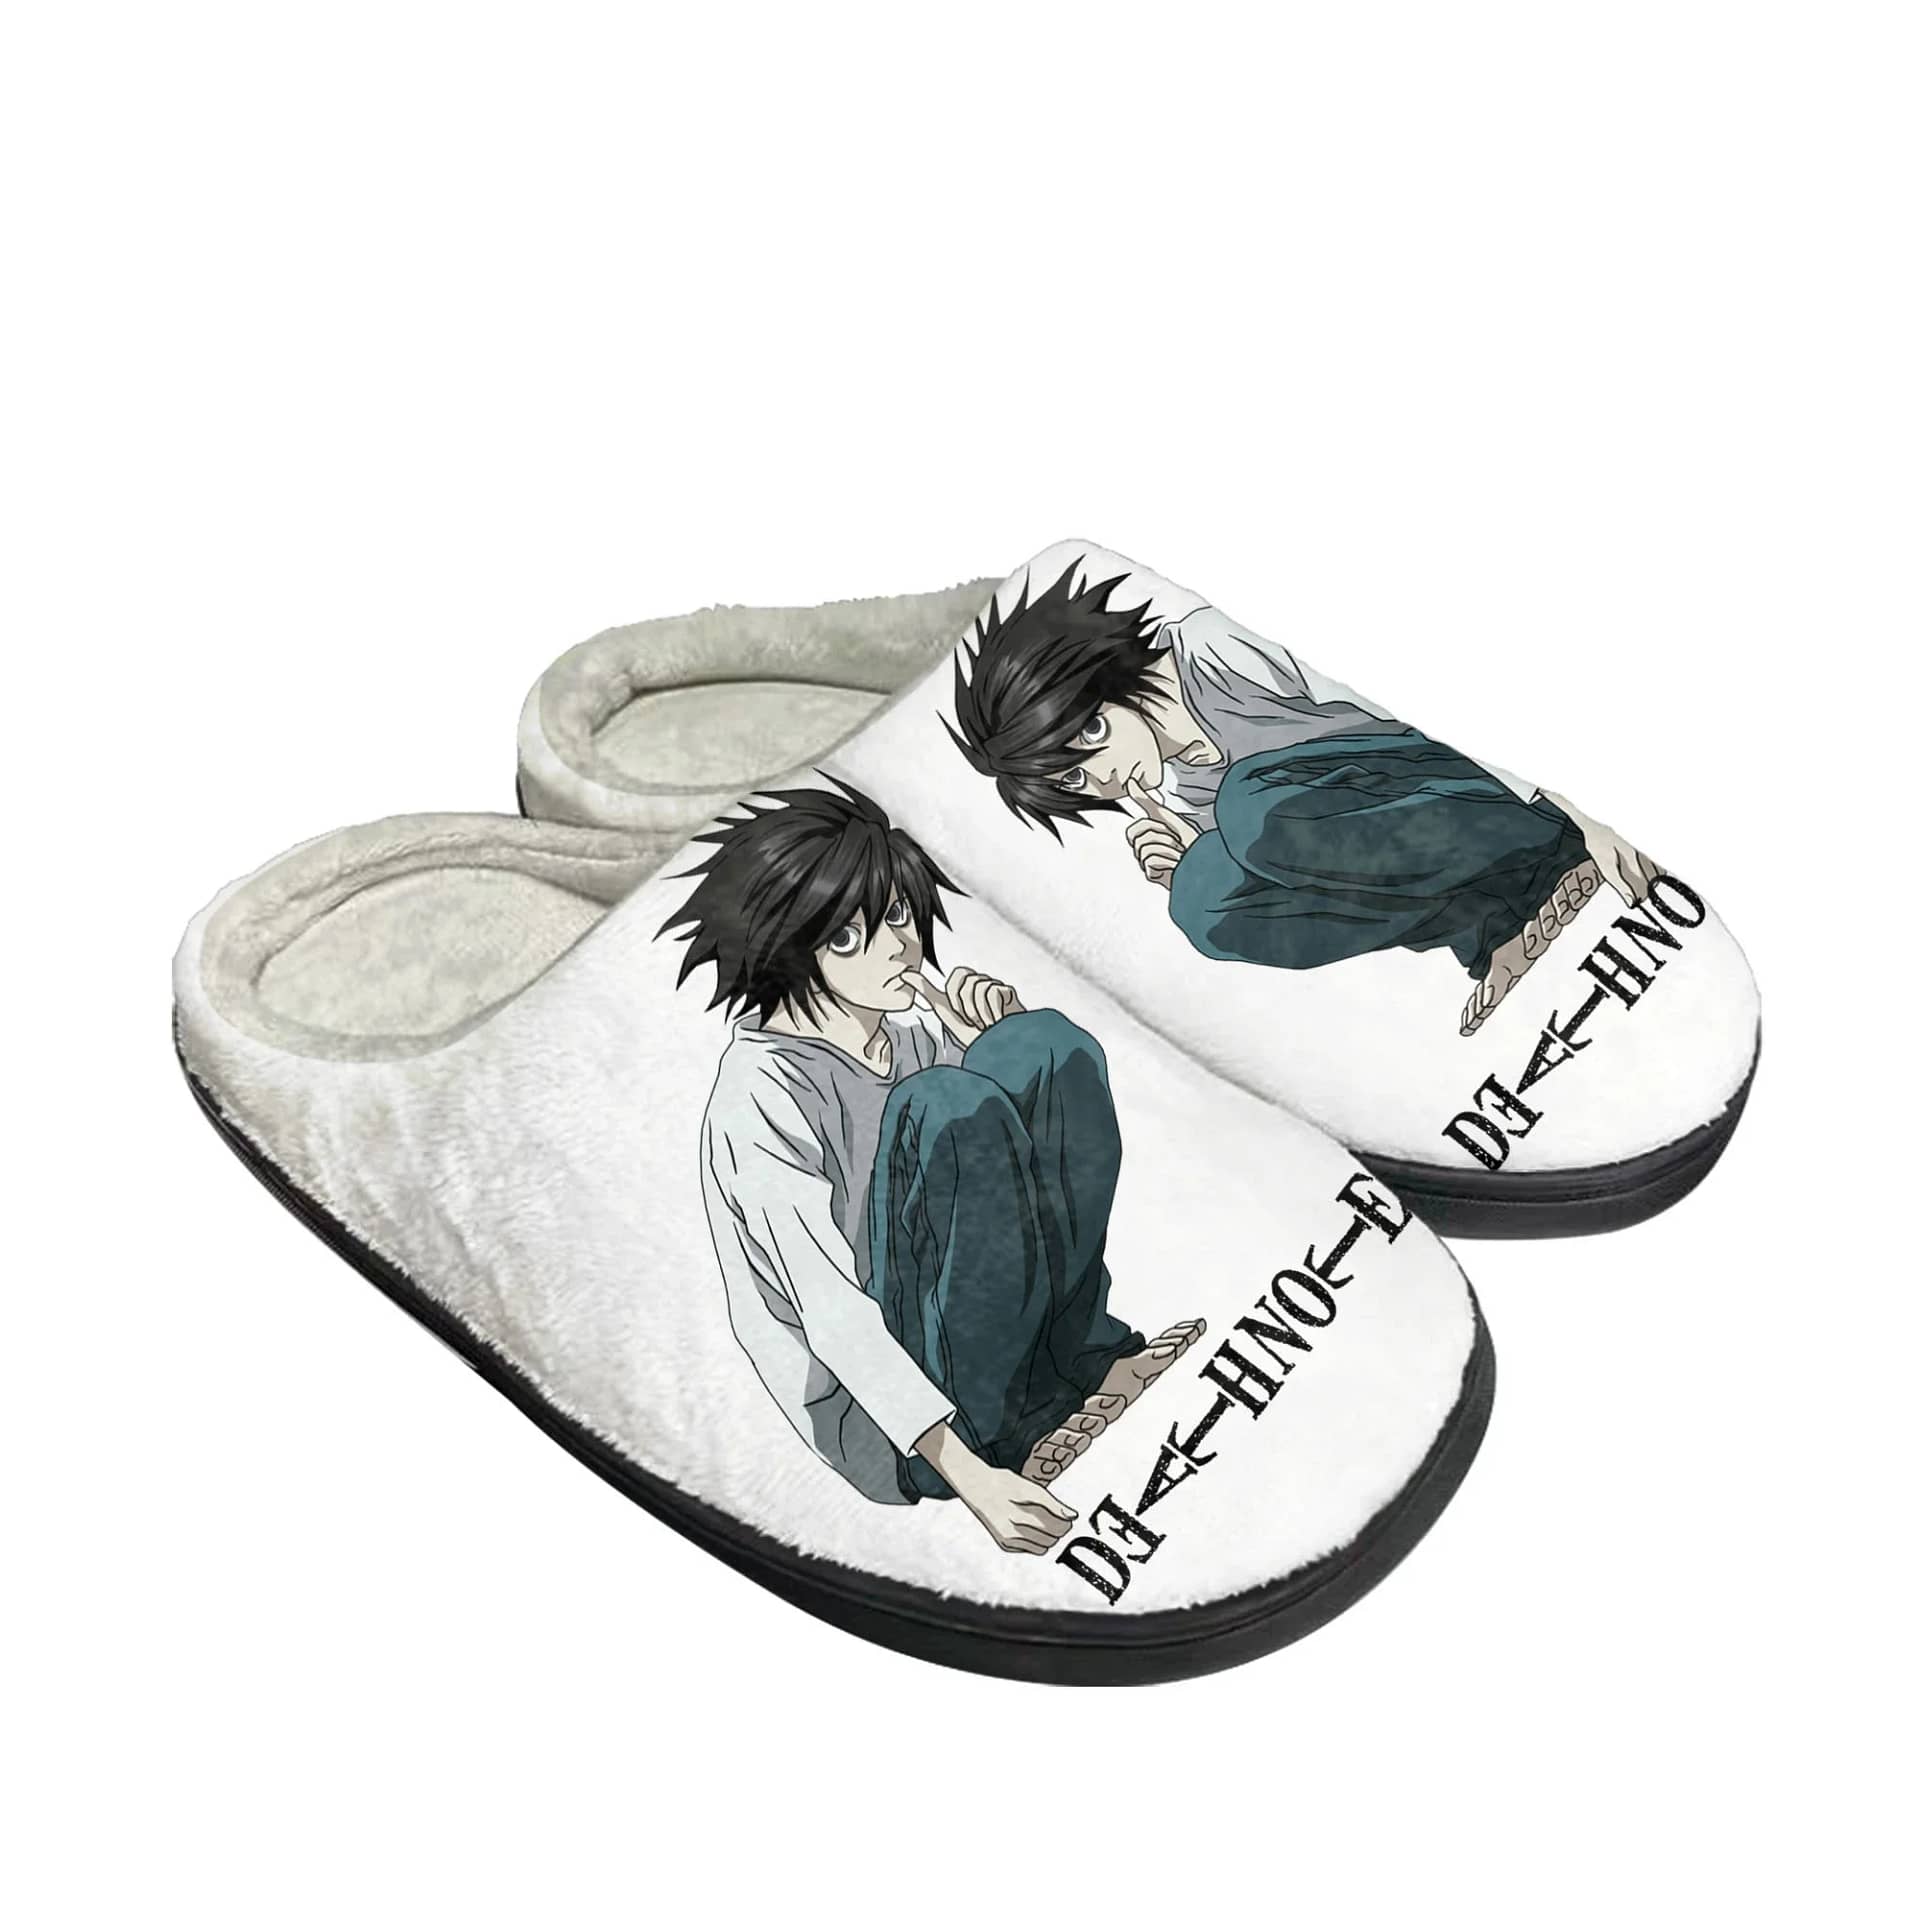 Anime Death Note Yagami Lawliet L Shoes Slippers